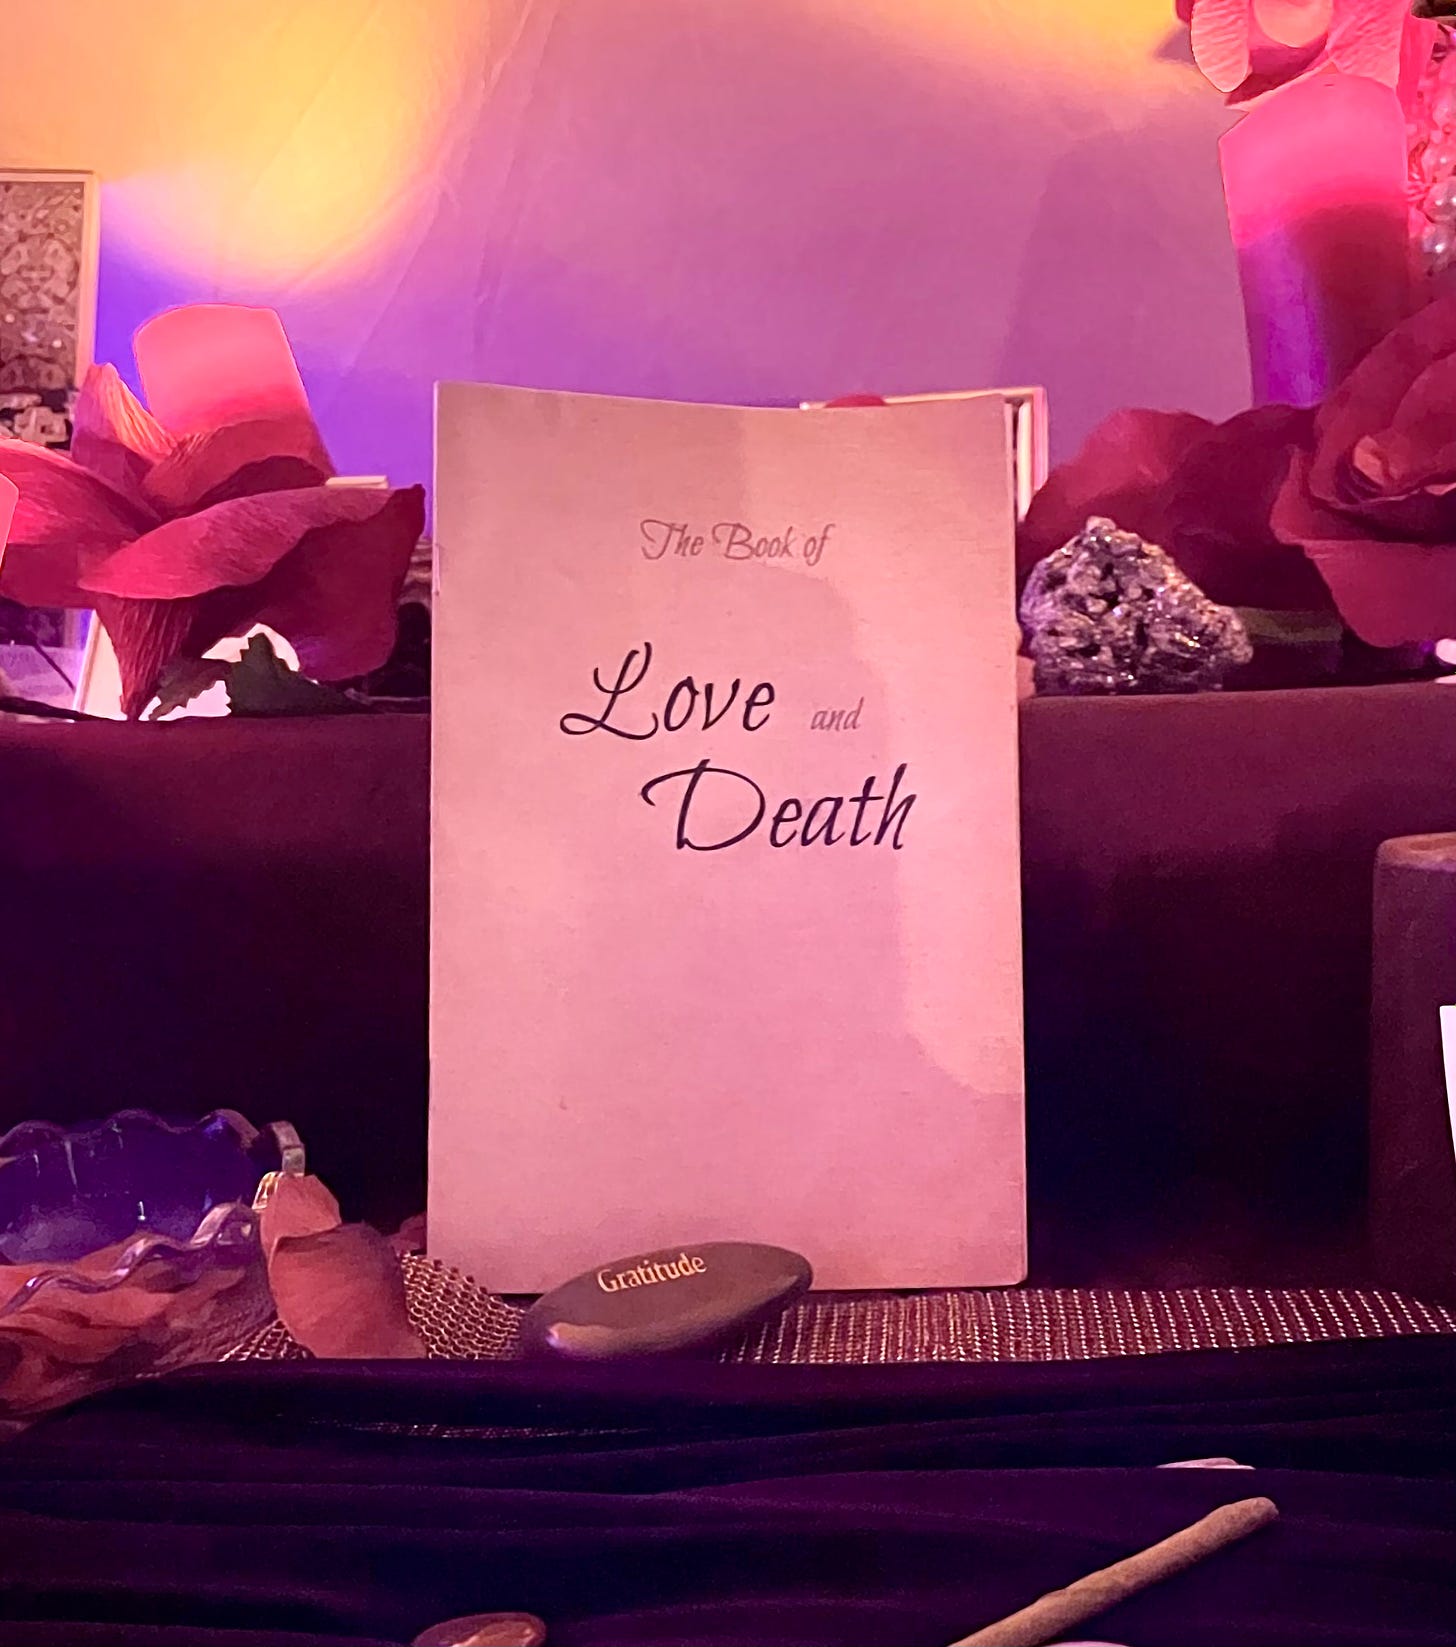 A close-up photo of The Book of Love and Death, standing on an altar table in purple and yellow lights.